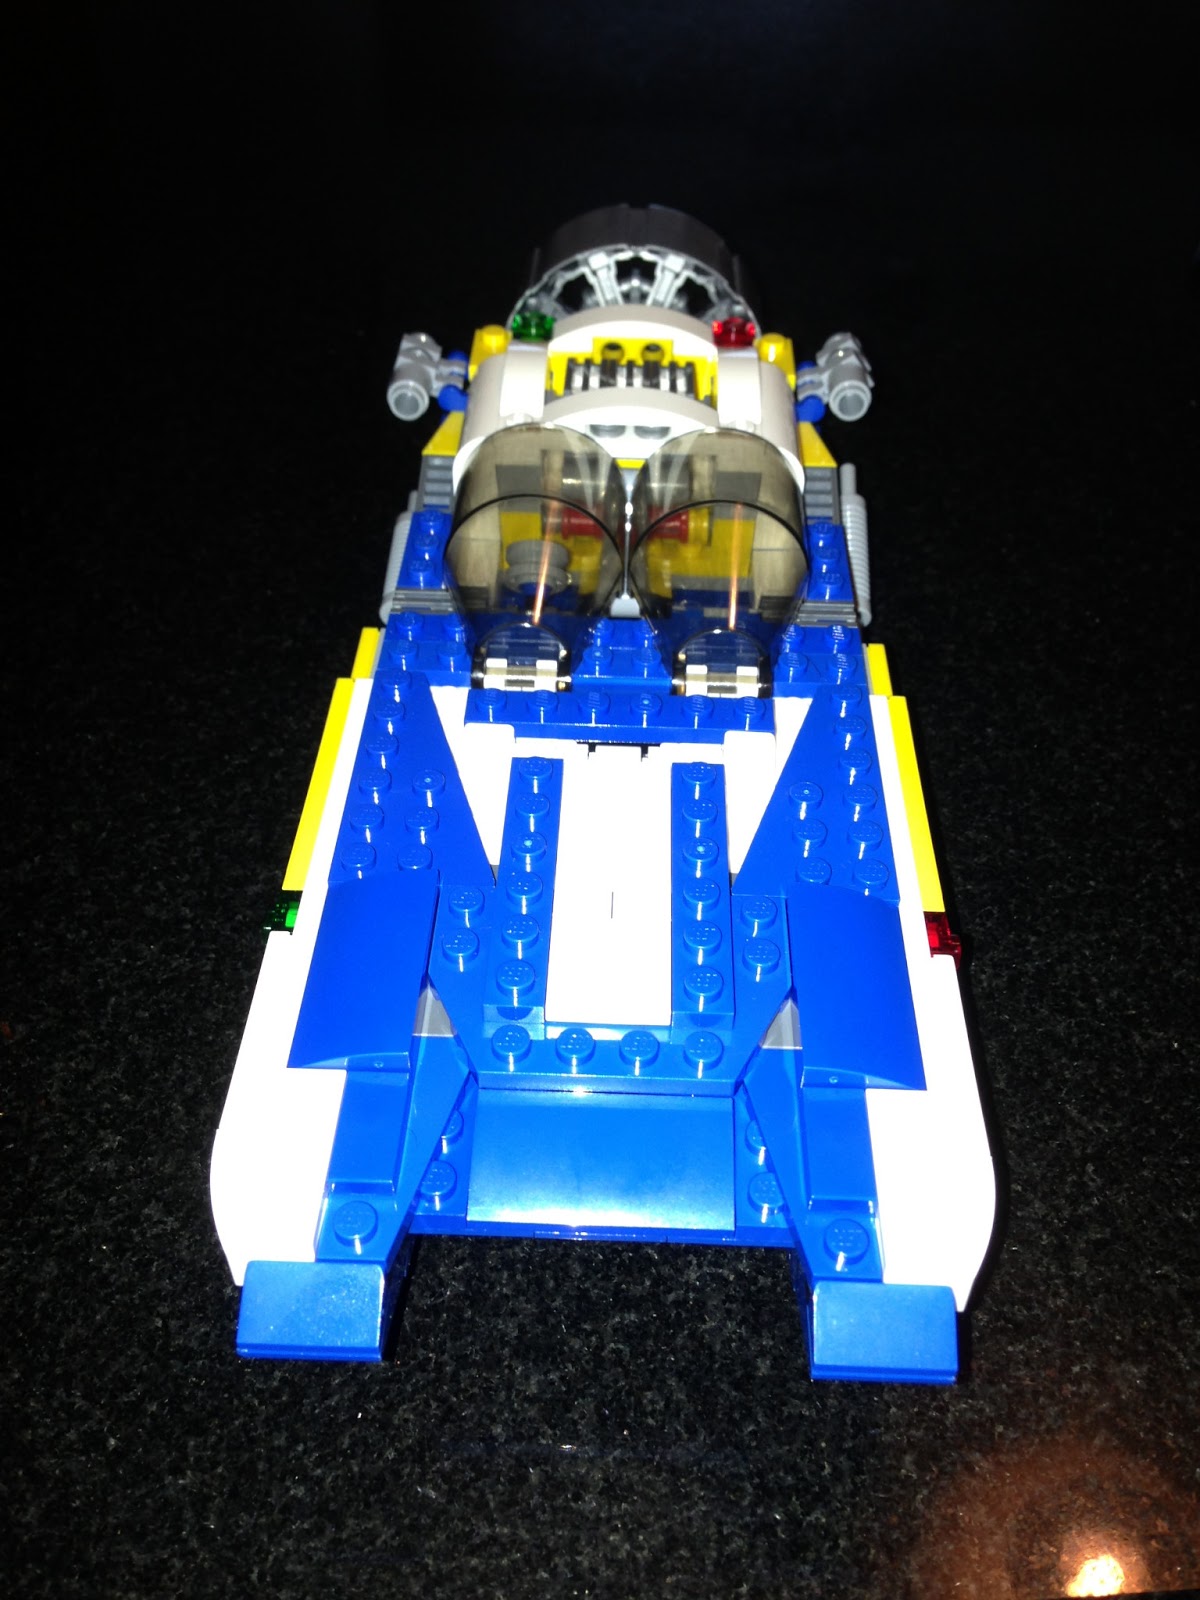 meor azhar's blog: made a jet boat based on a lego creator